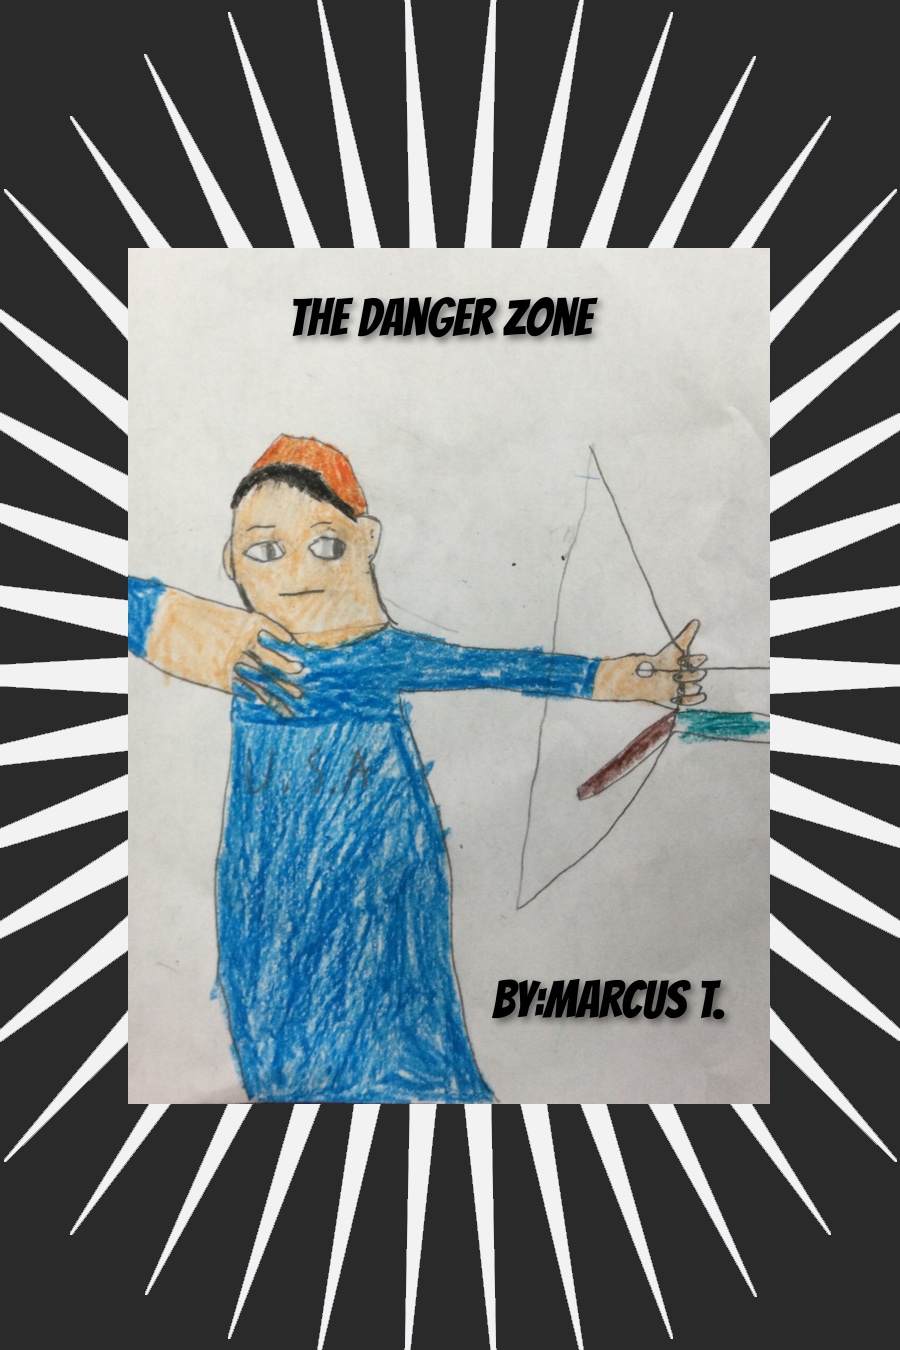 The Danger Zone by Marcus T